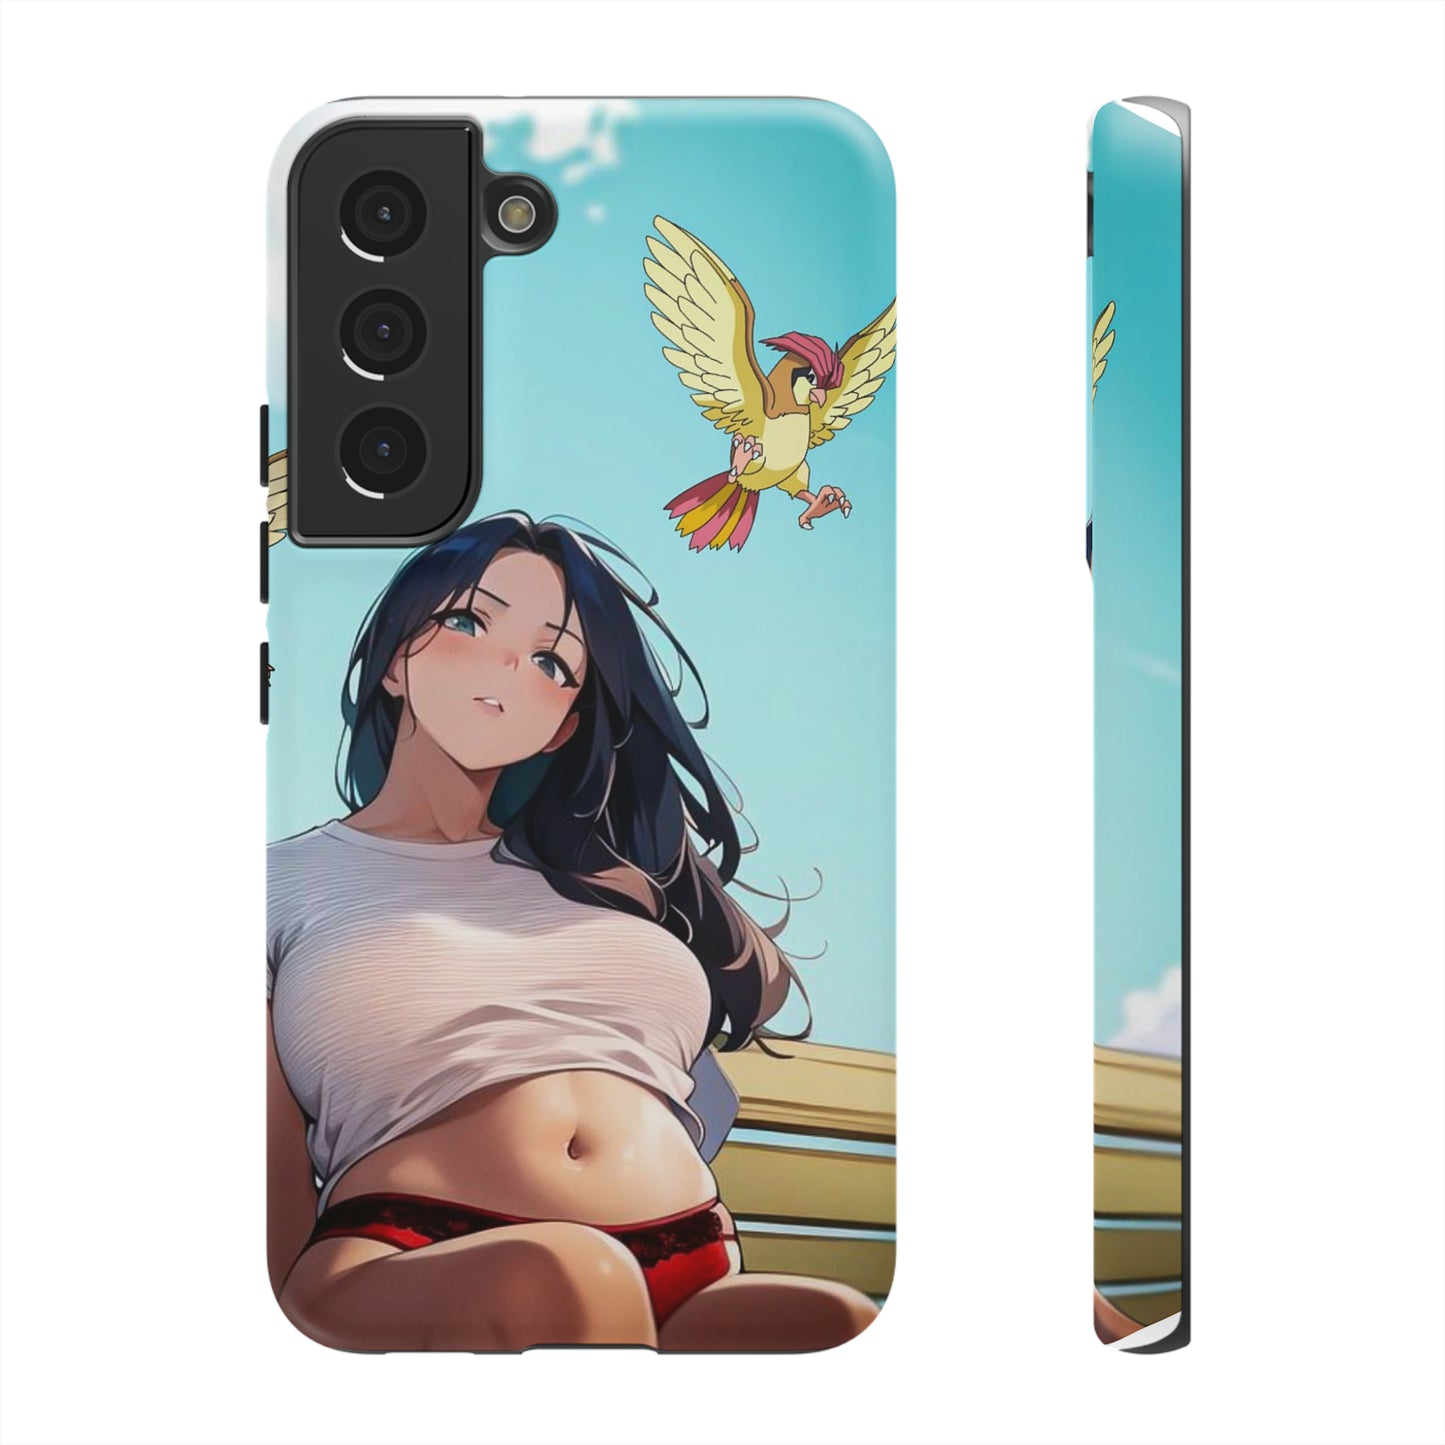 Friends in the Sky- Anime Style Art Tough Cases